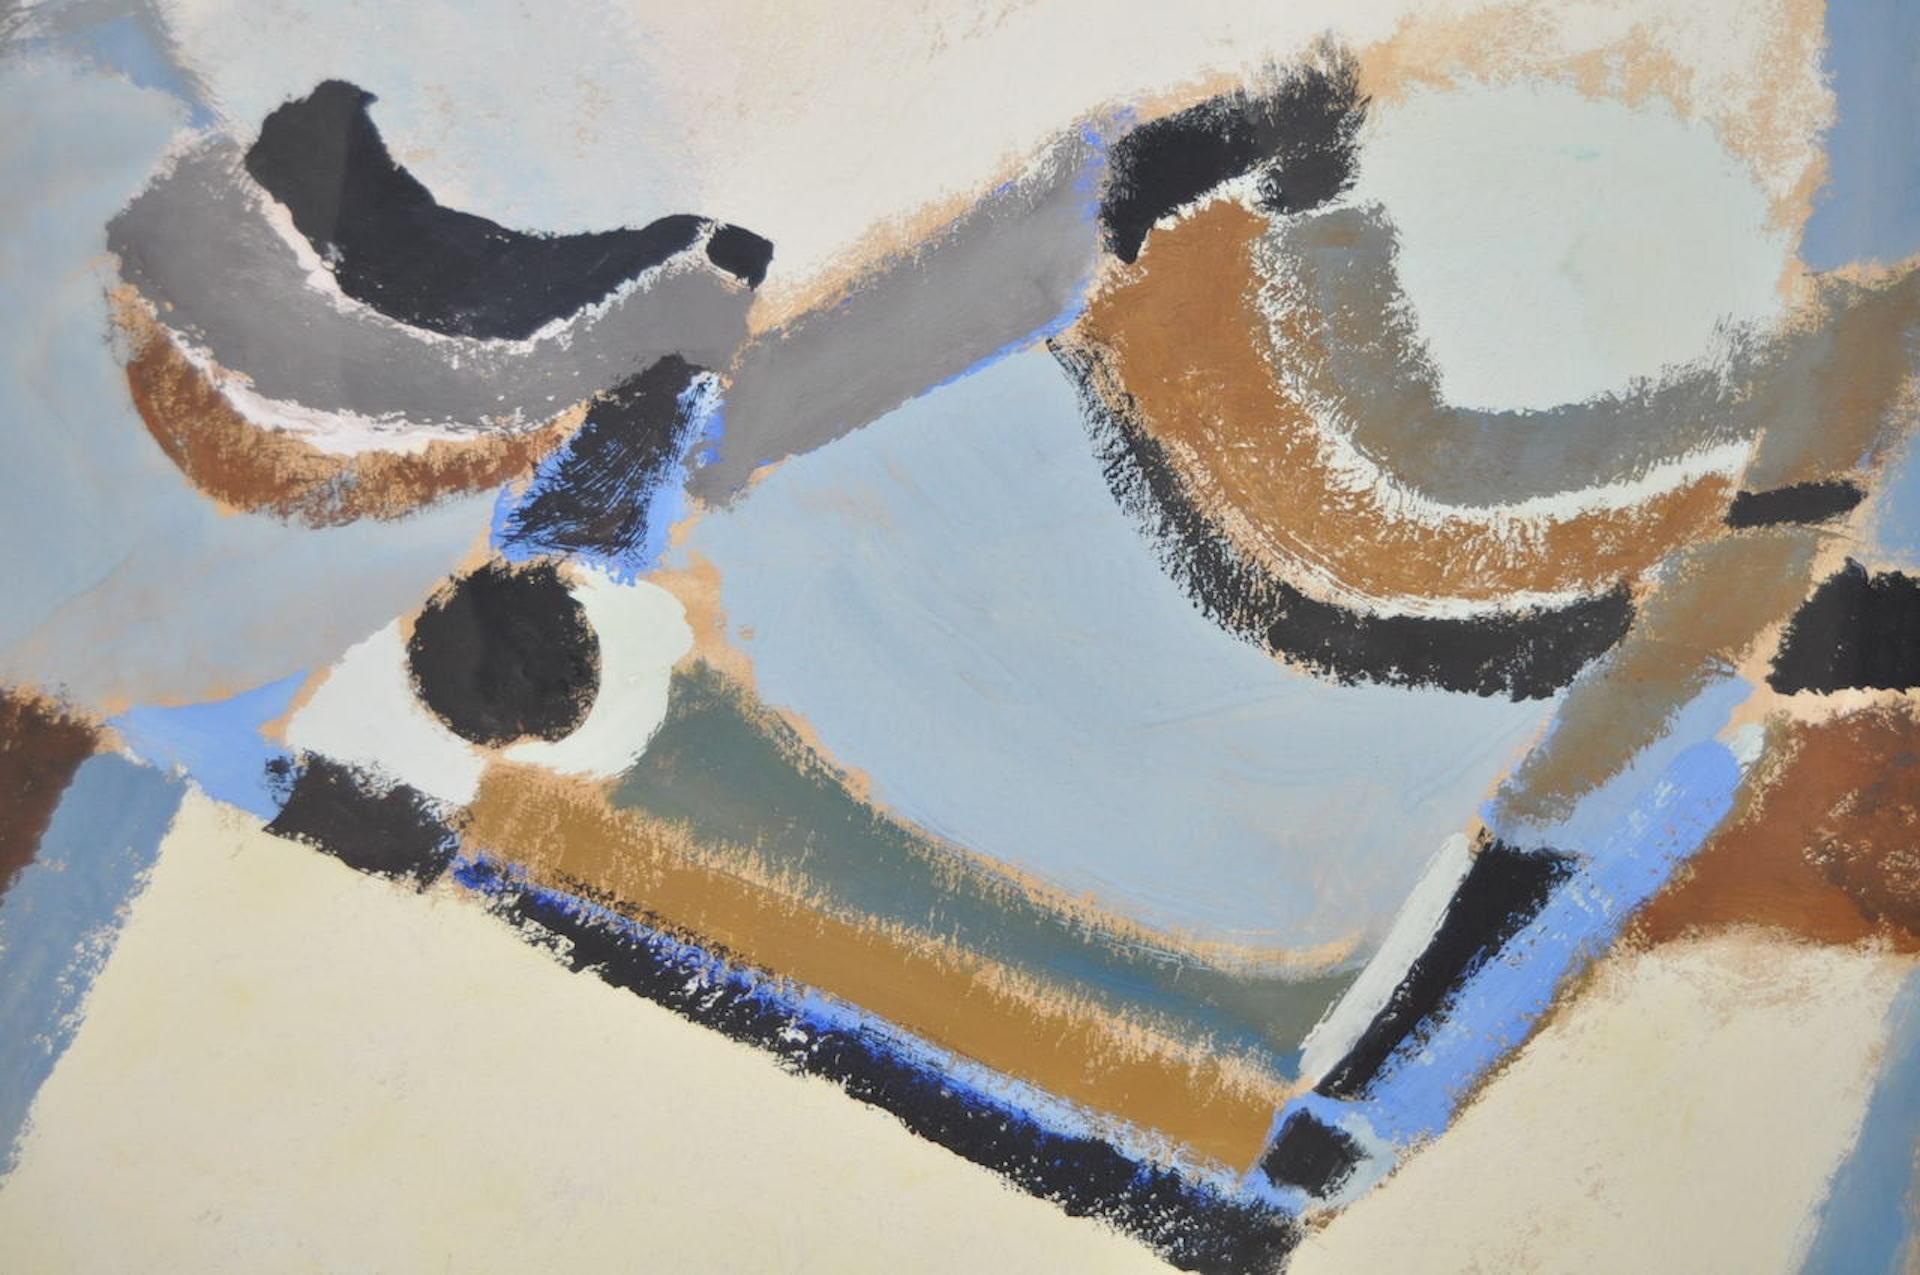 1970s Abstract Painting by San Francisco Artist P. Ciment (American, b. 1947) 1